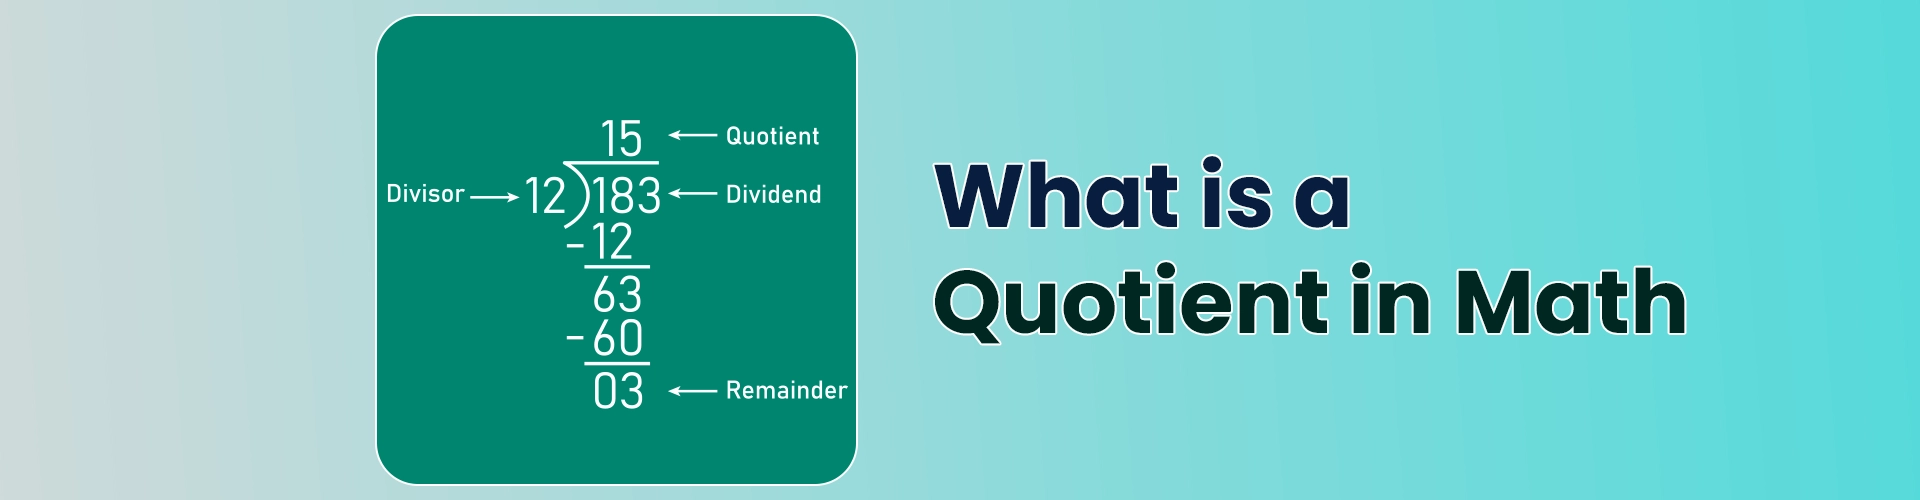 What is a Quotient in Math